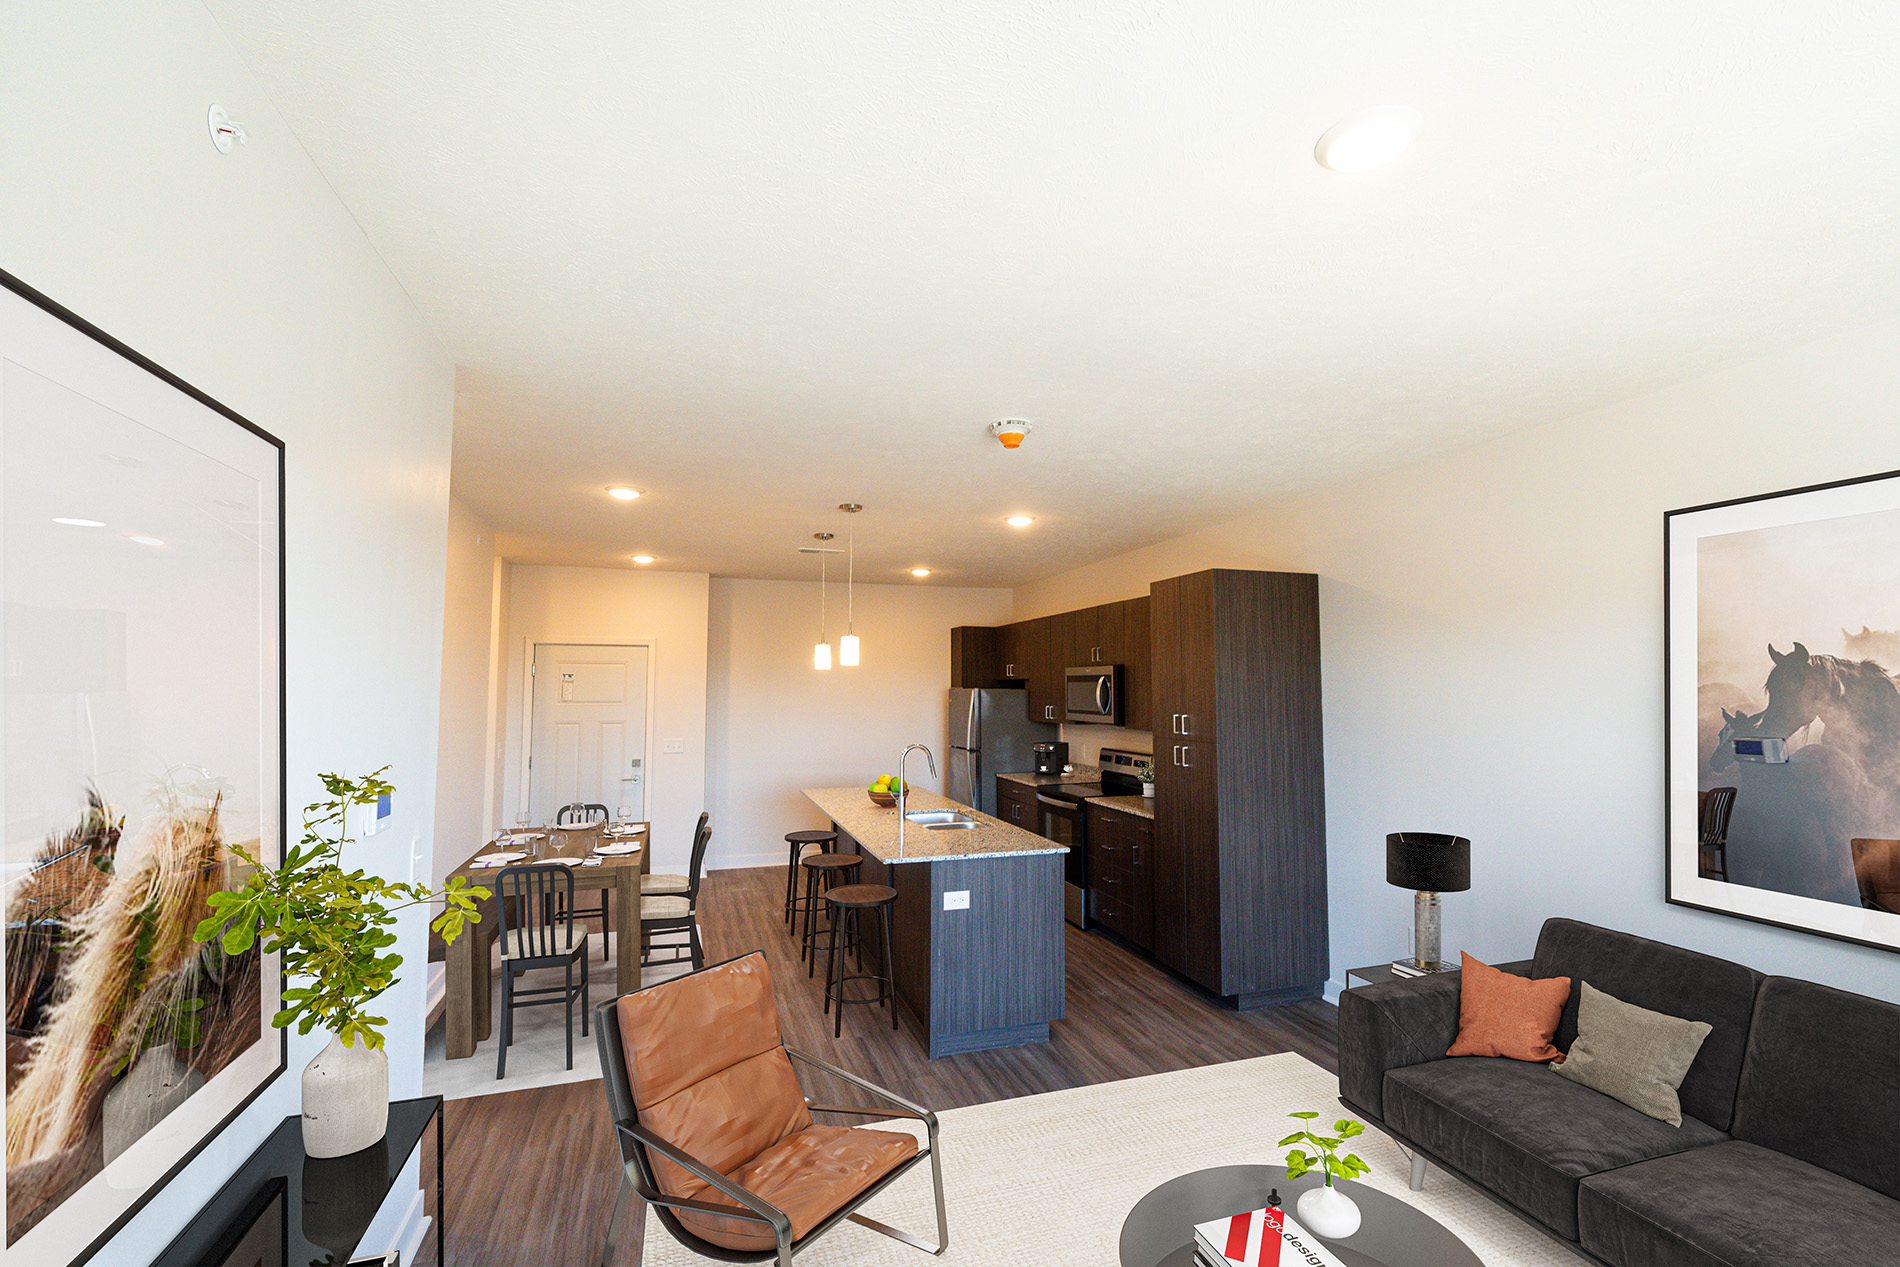 Living Room and Kitchen at EOS 75 Apartments in Bellevue Nebraska